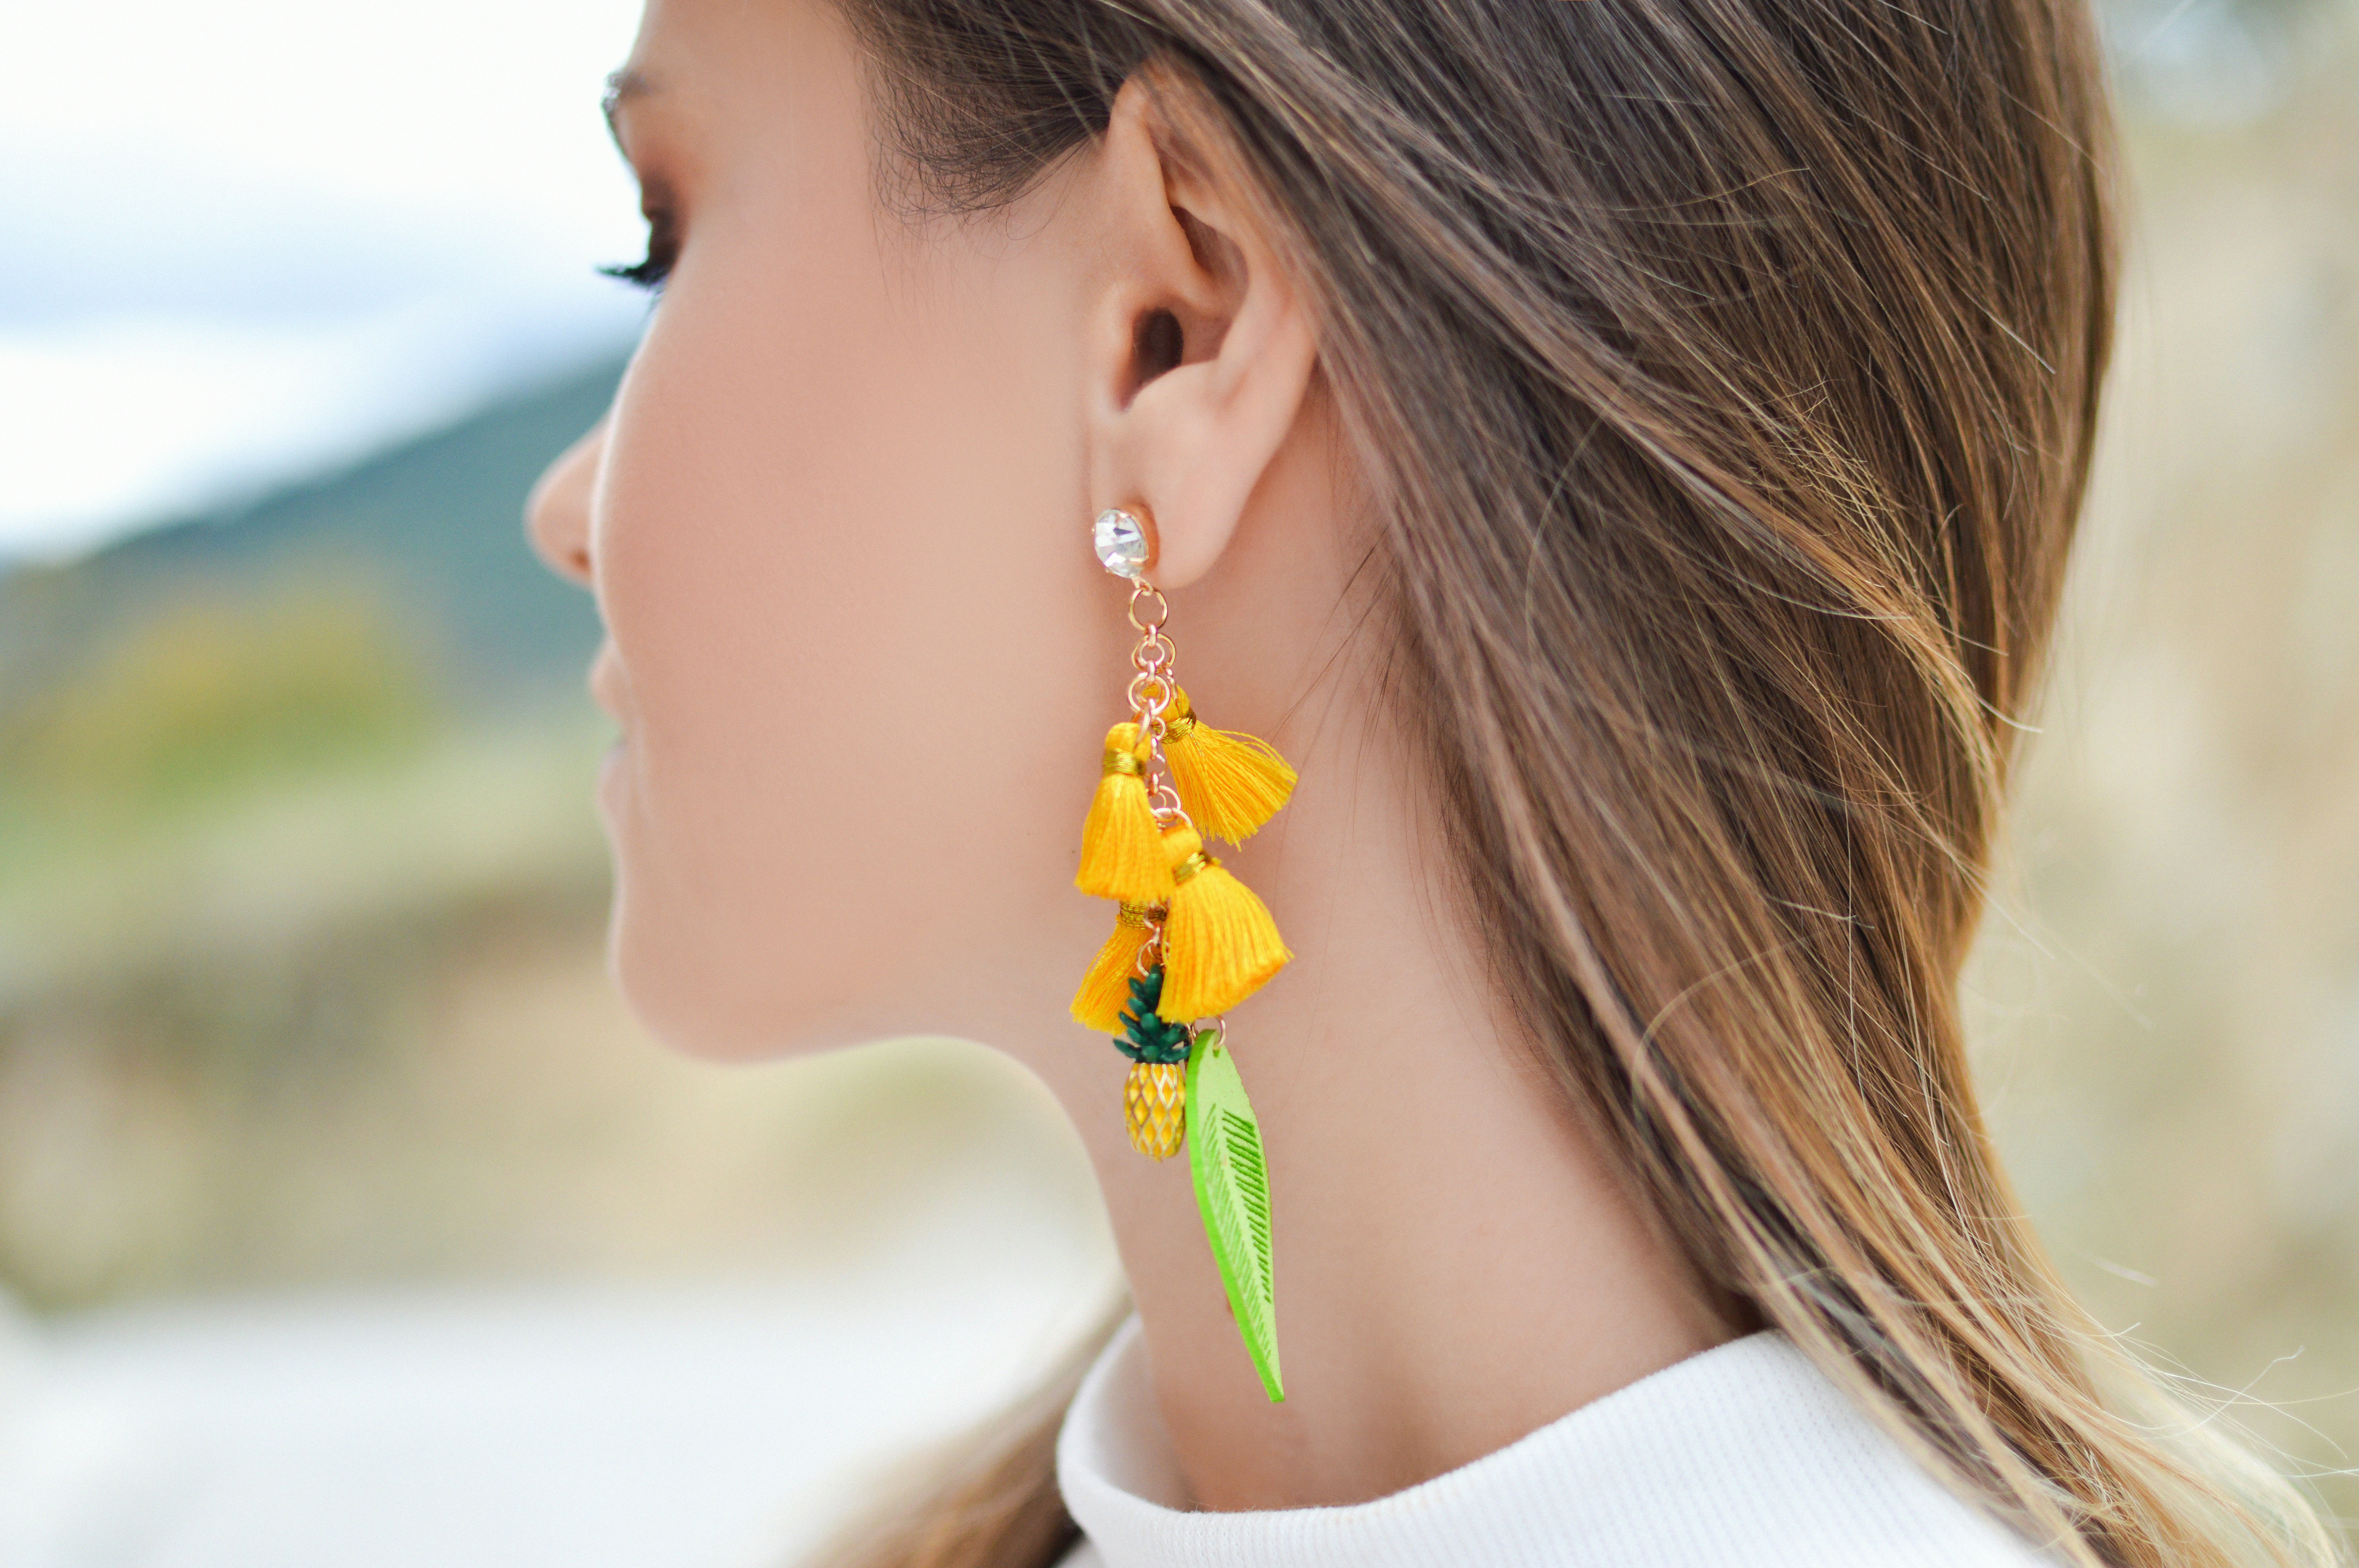 woman with yellow and green tasseled earring